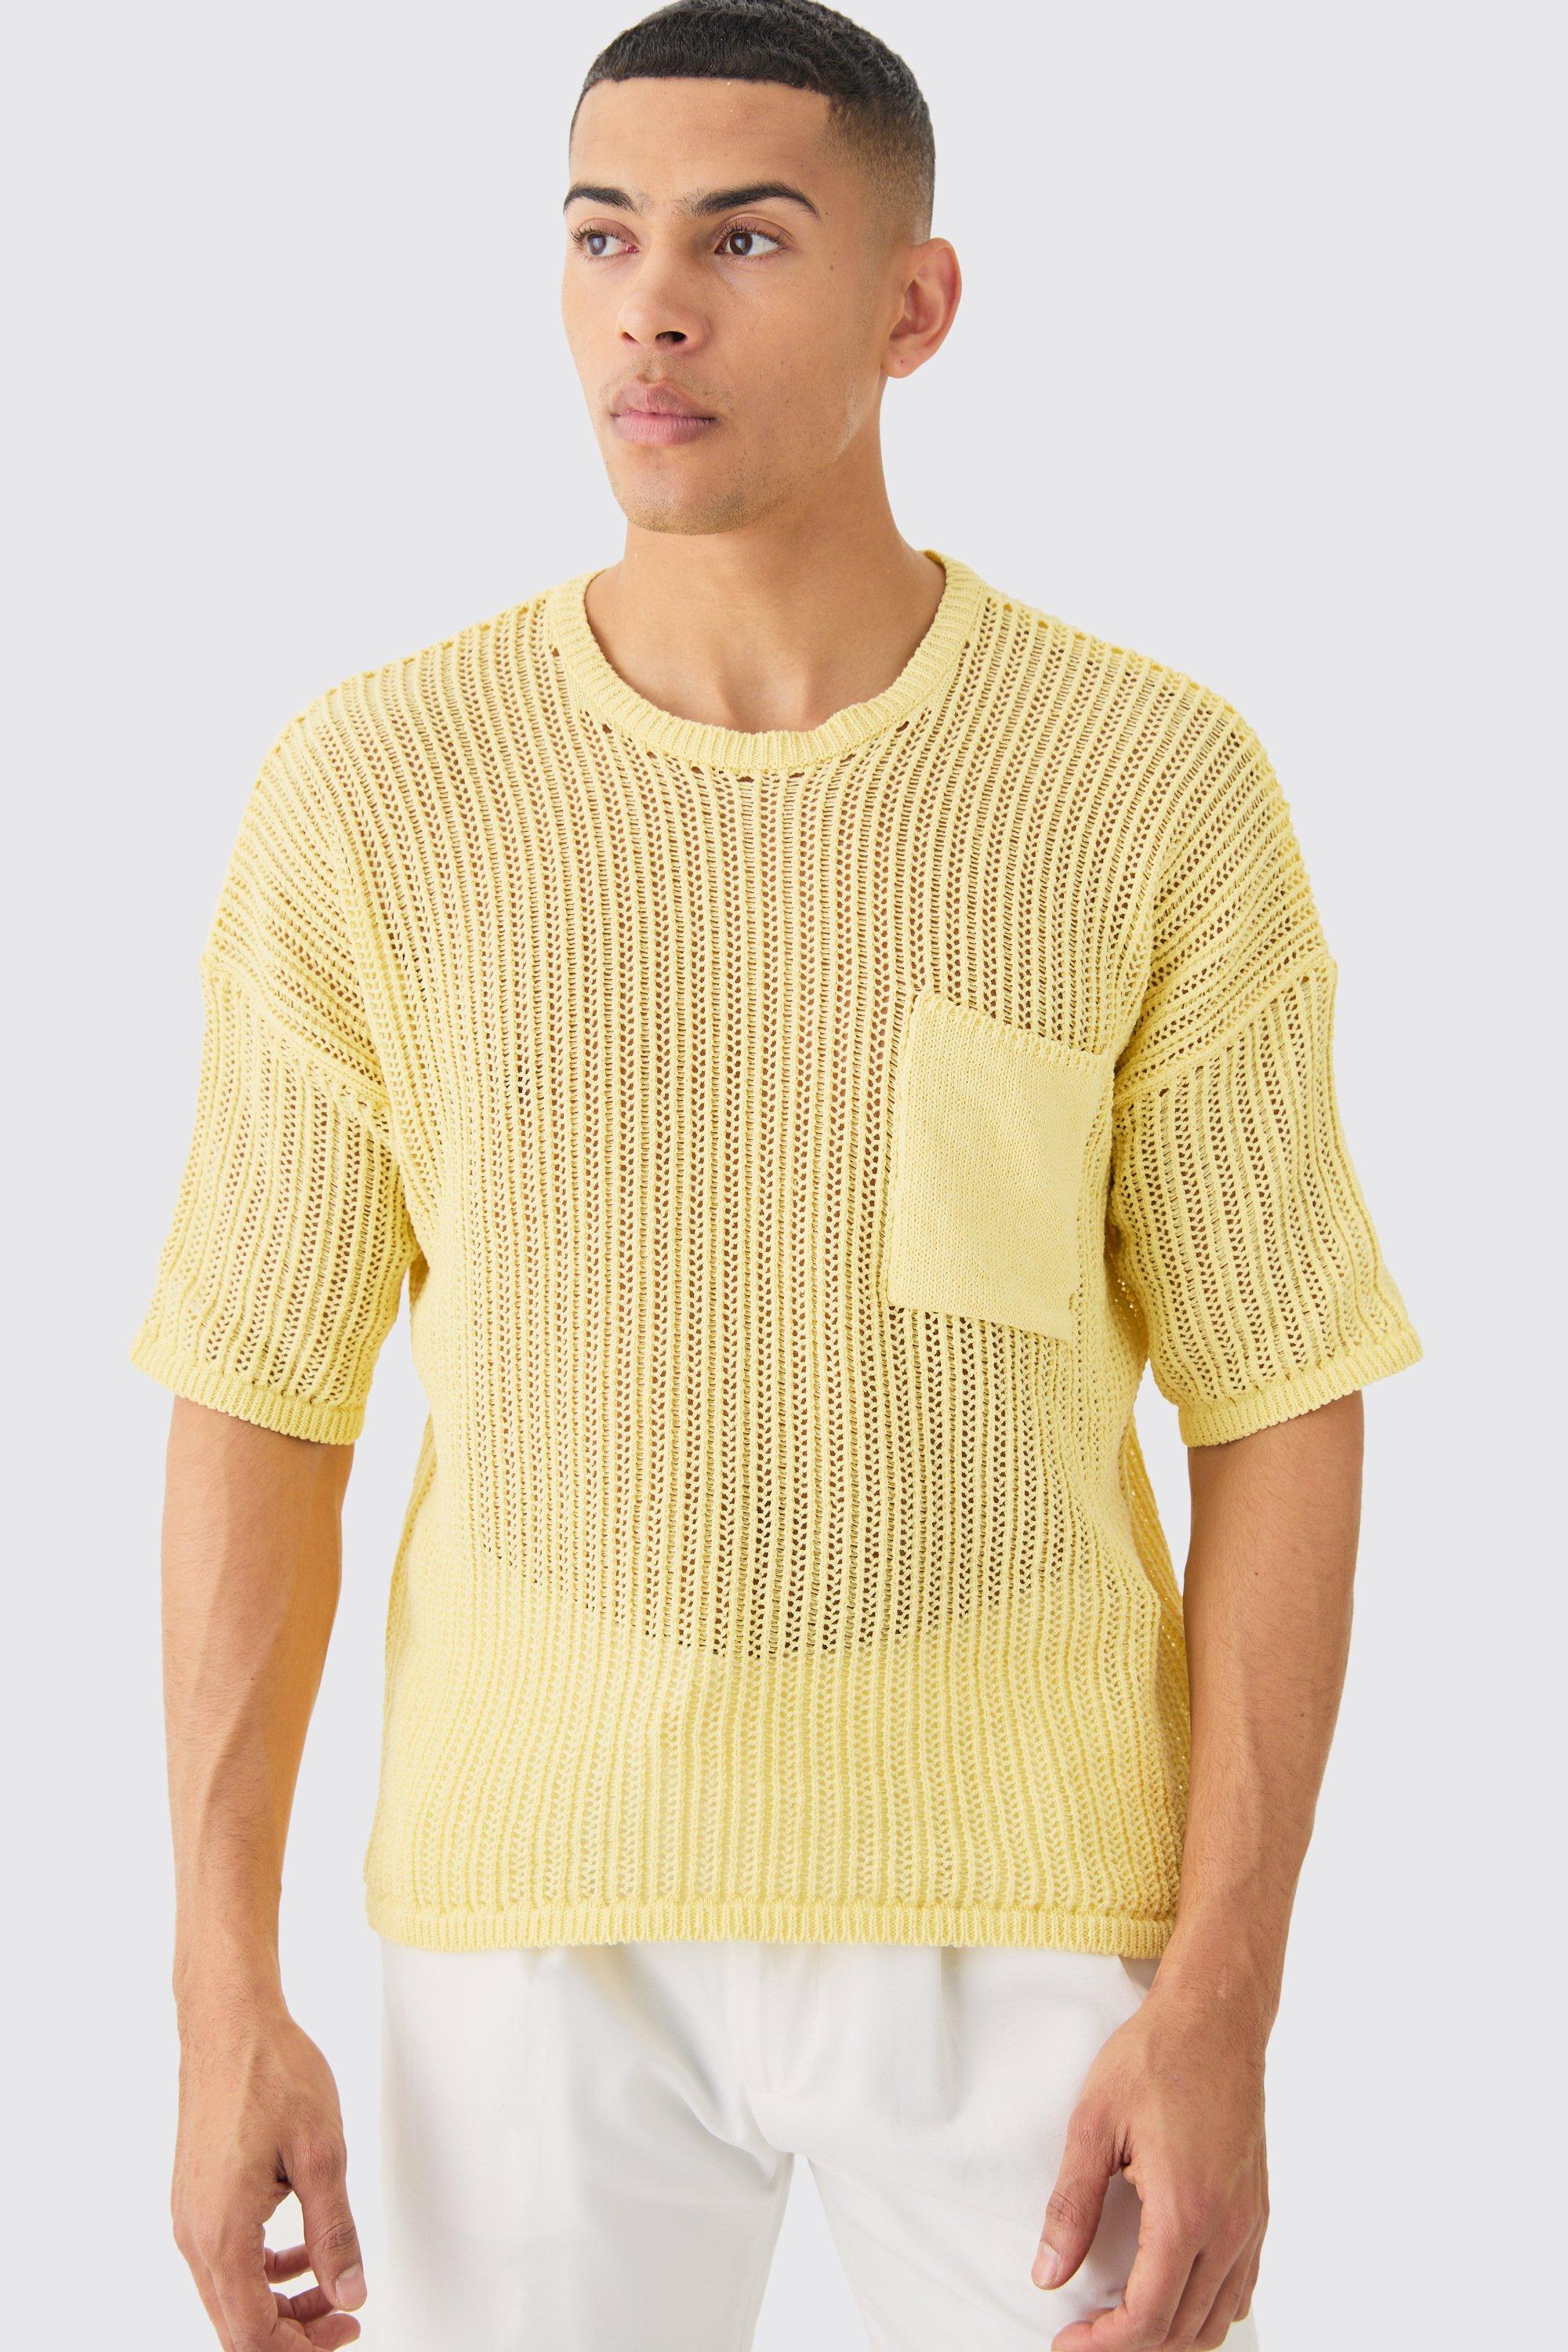 Image of Oversized Open Stitch T-shirt With Pocket In Yellow, Giallo